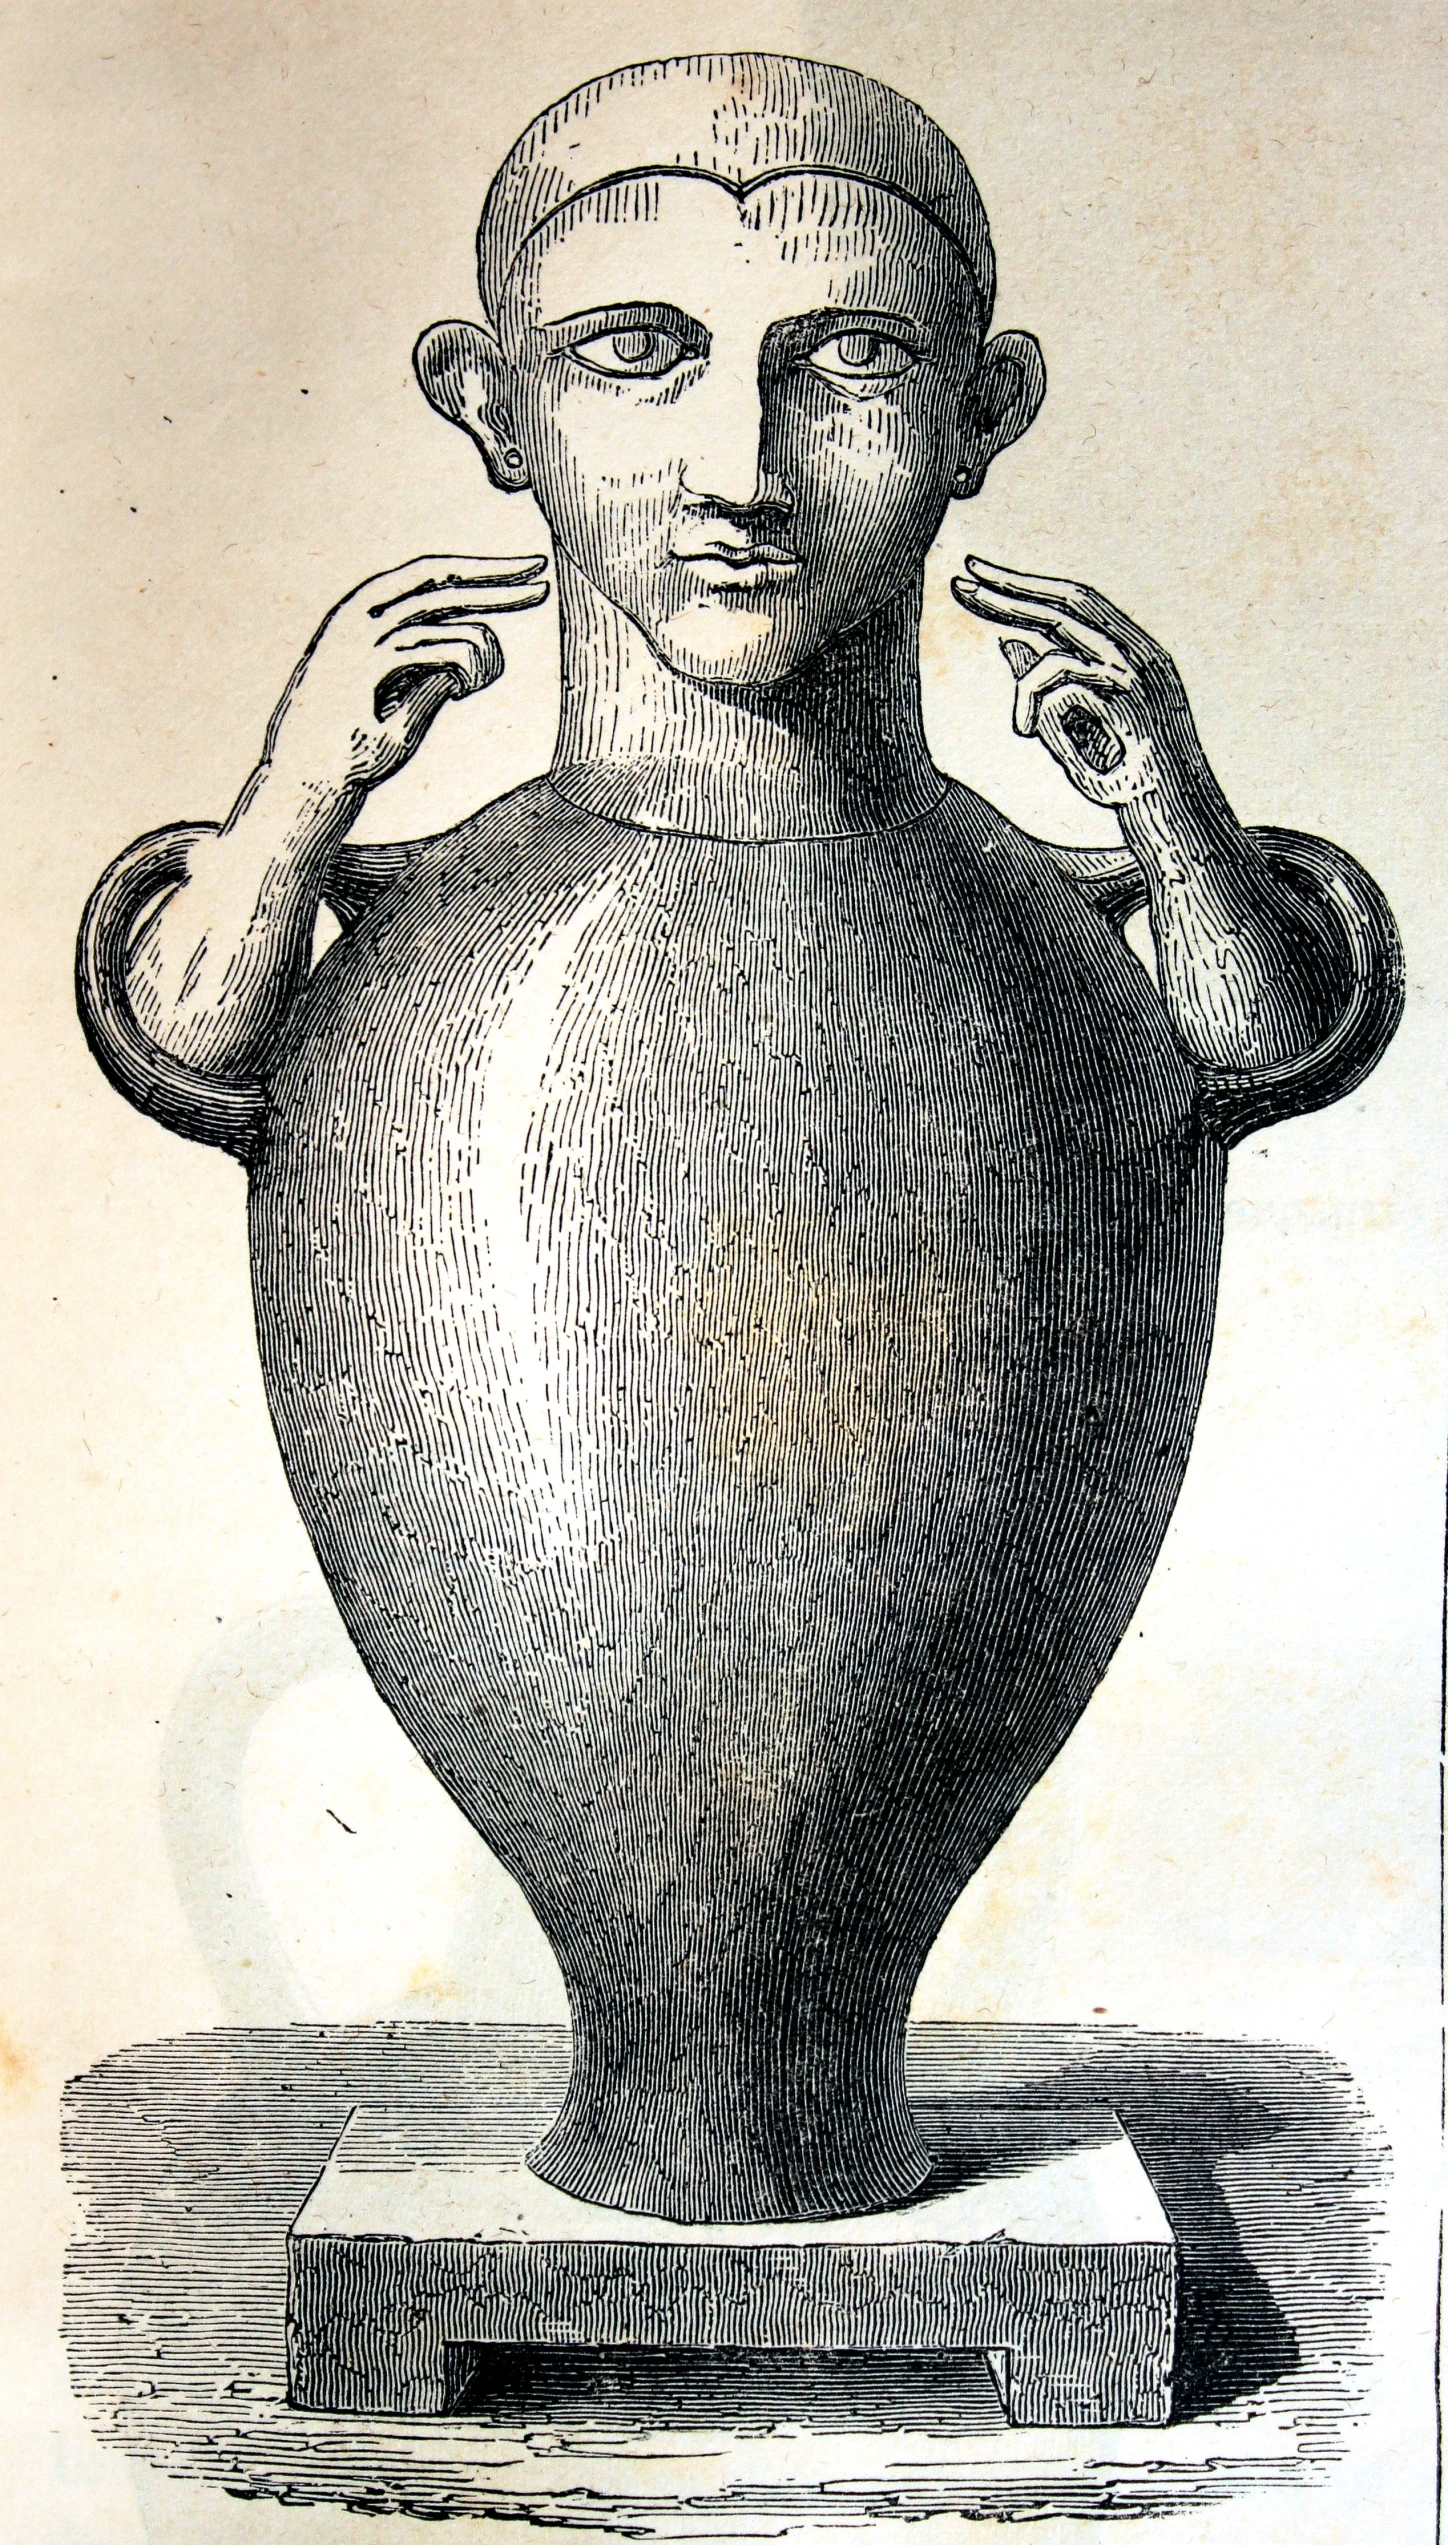 an ink drawing of a vase in a glass vase